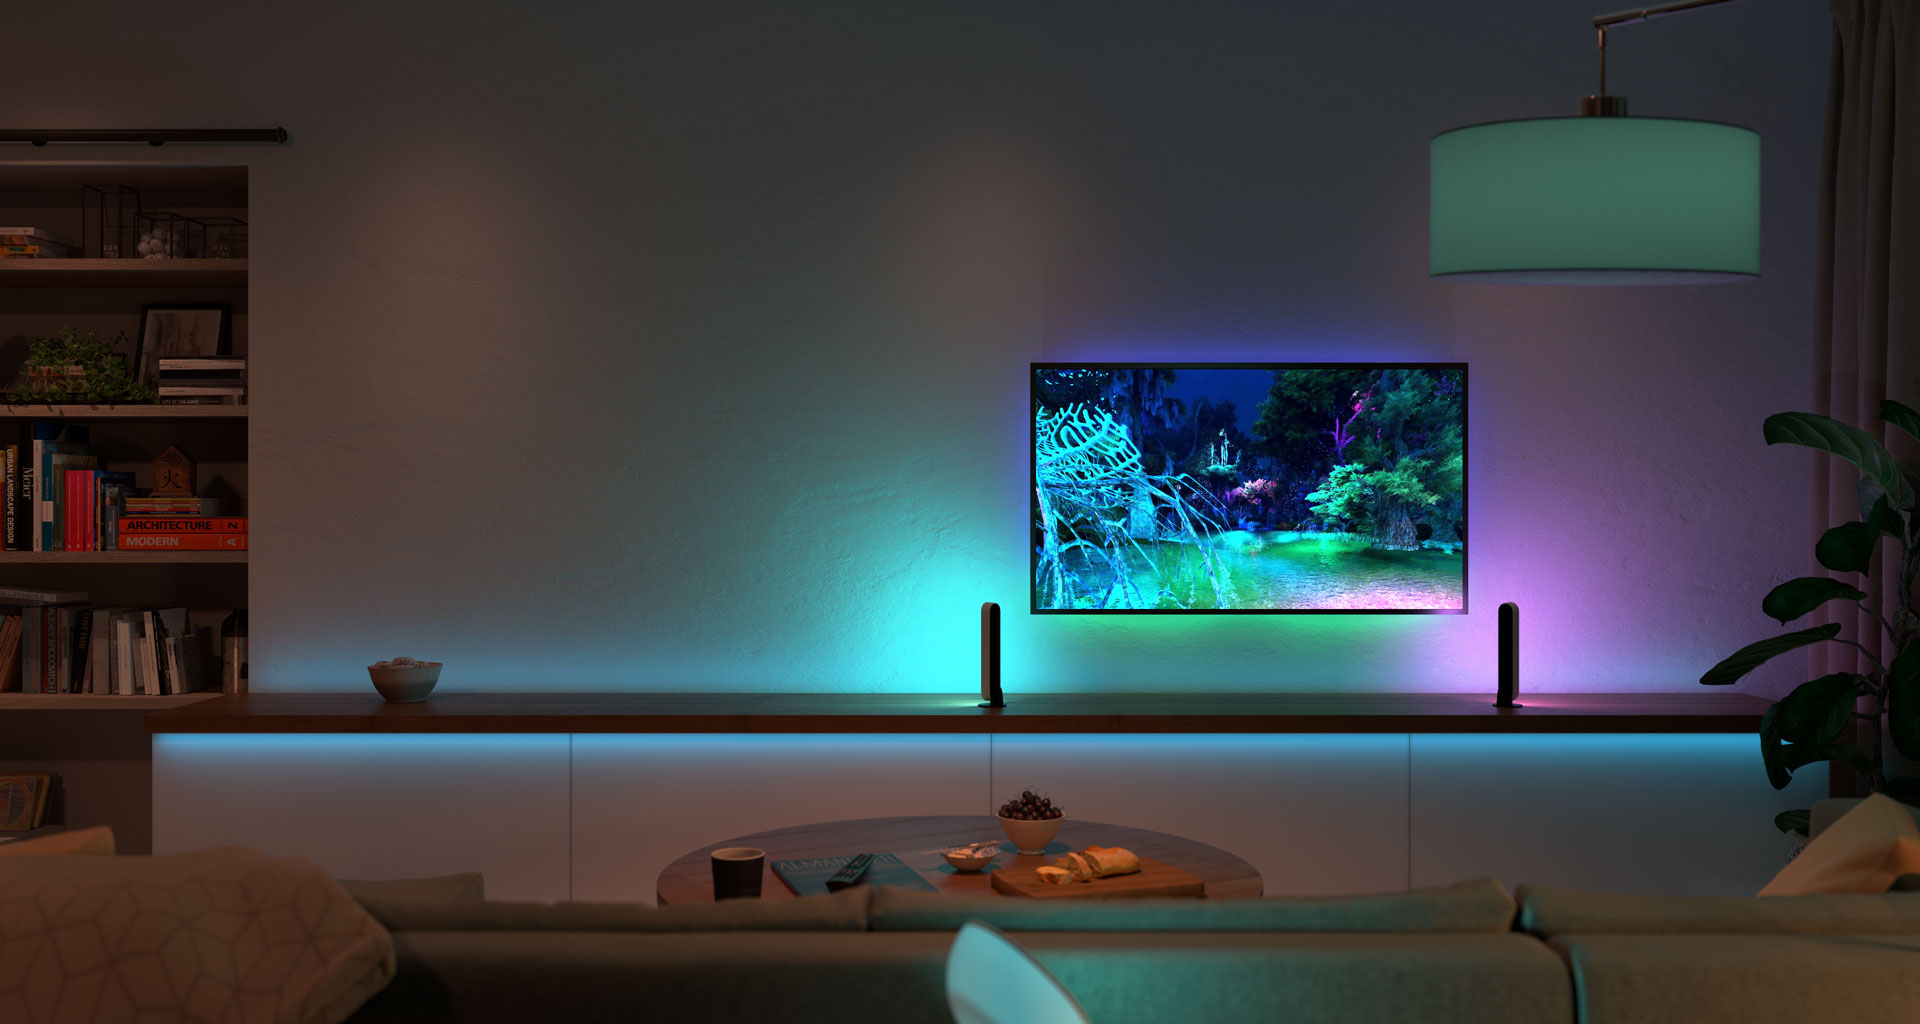 10 tips to improve your home lighting with Philips Hue